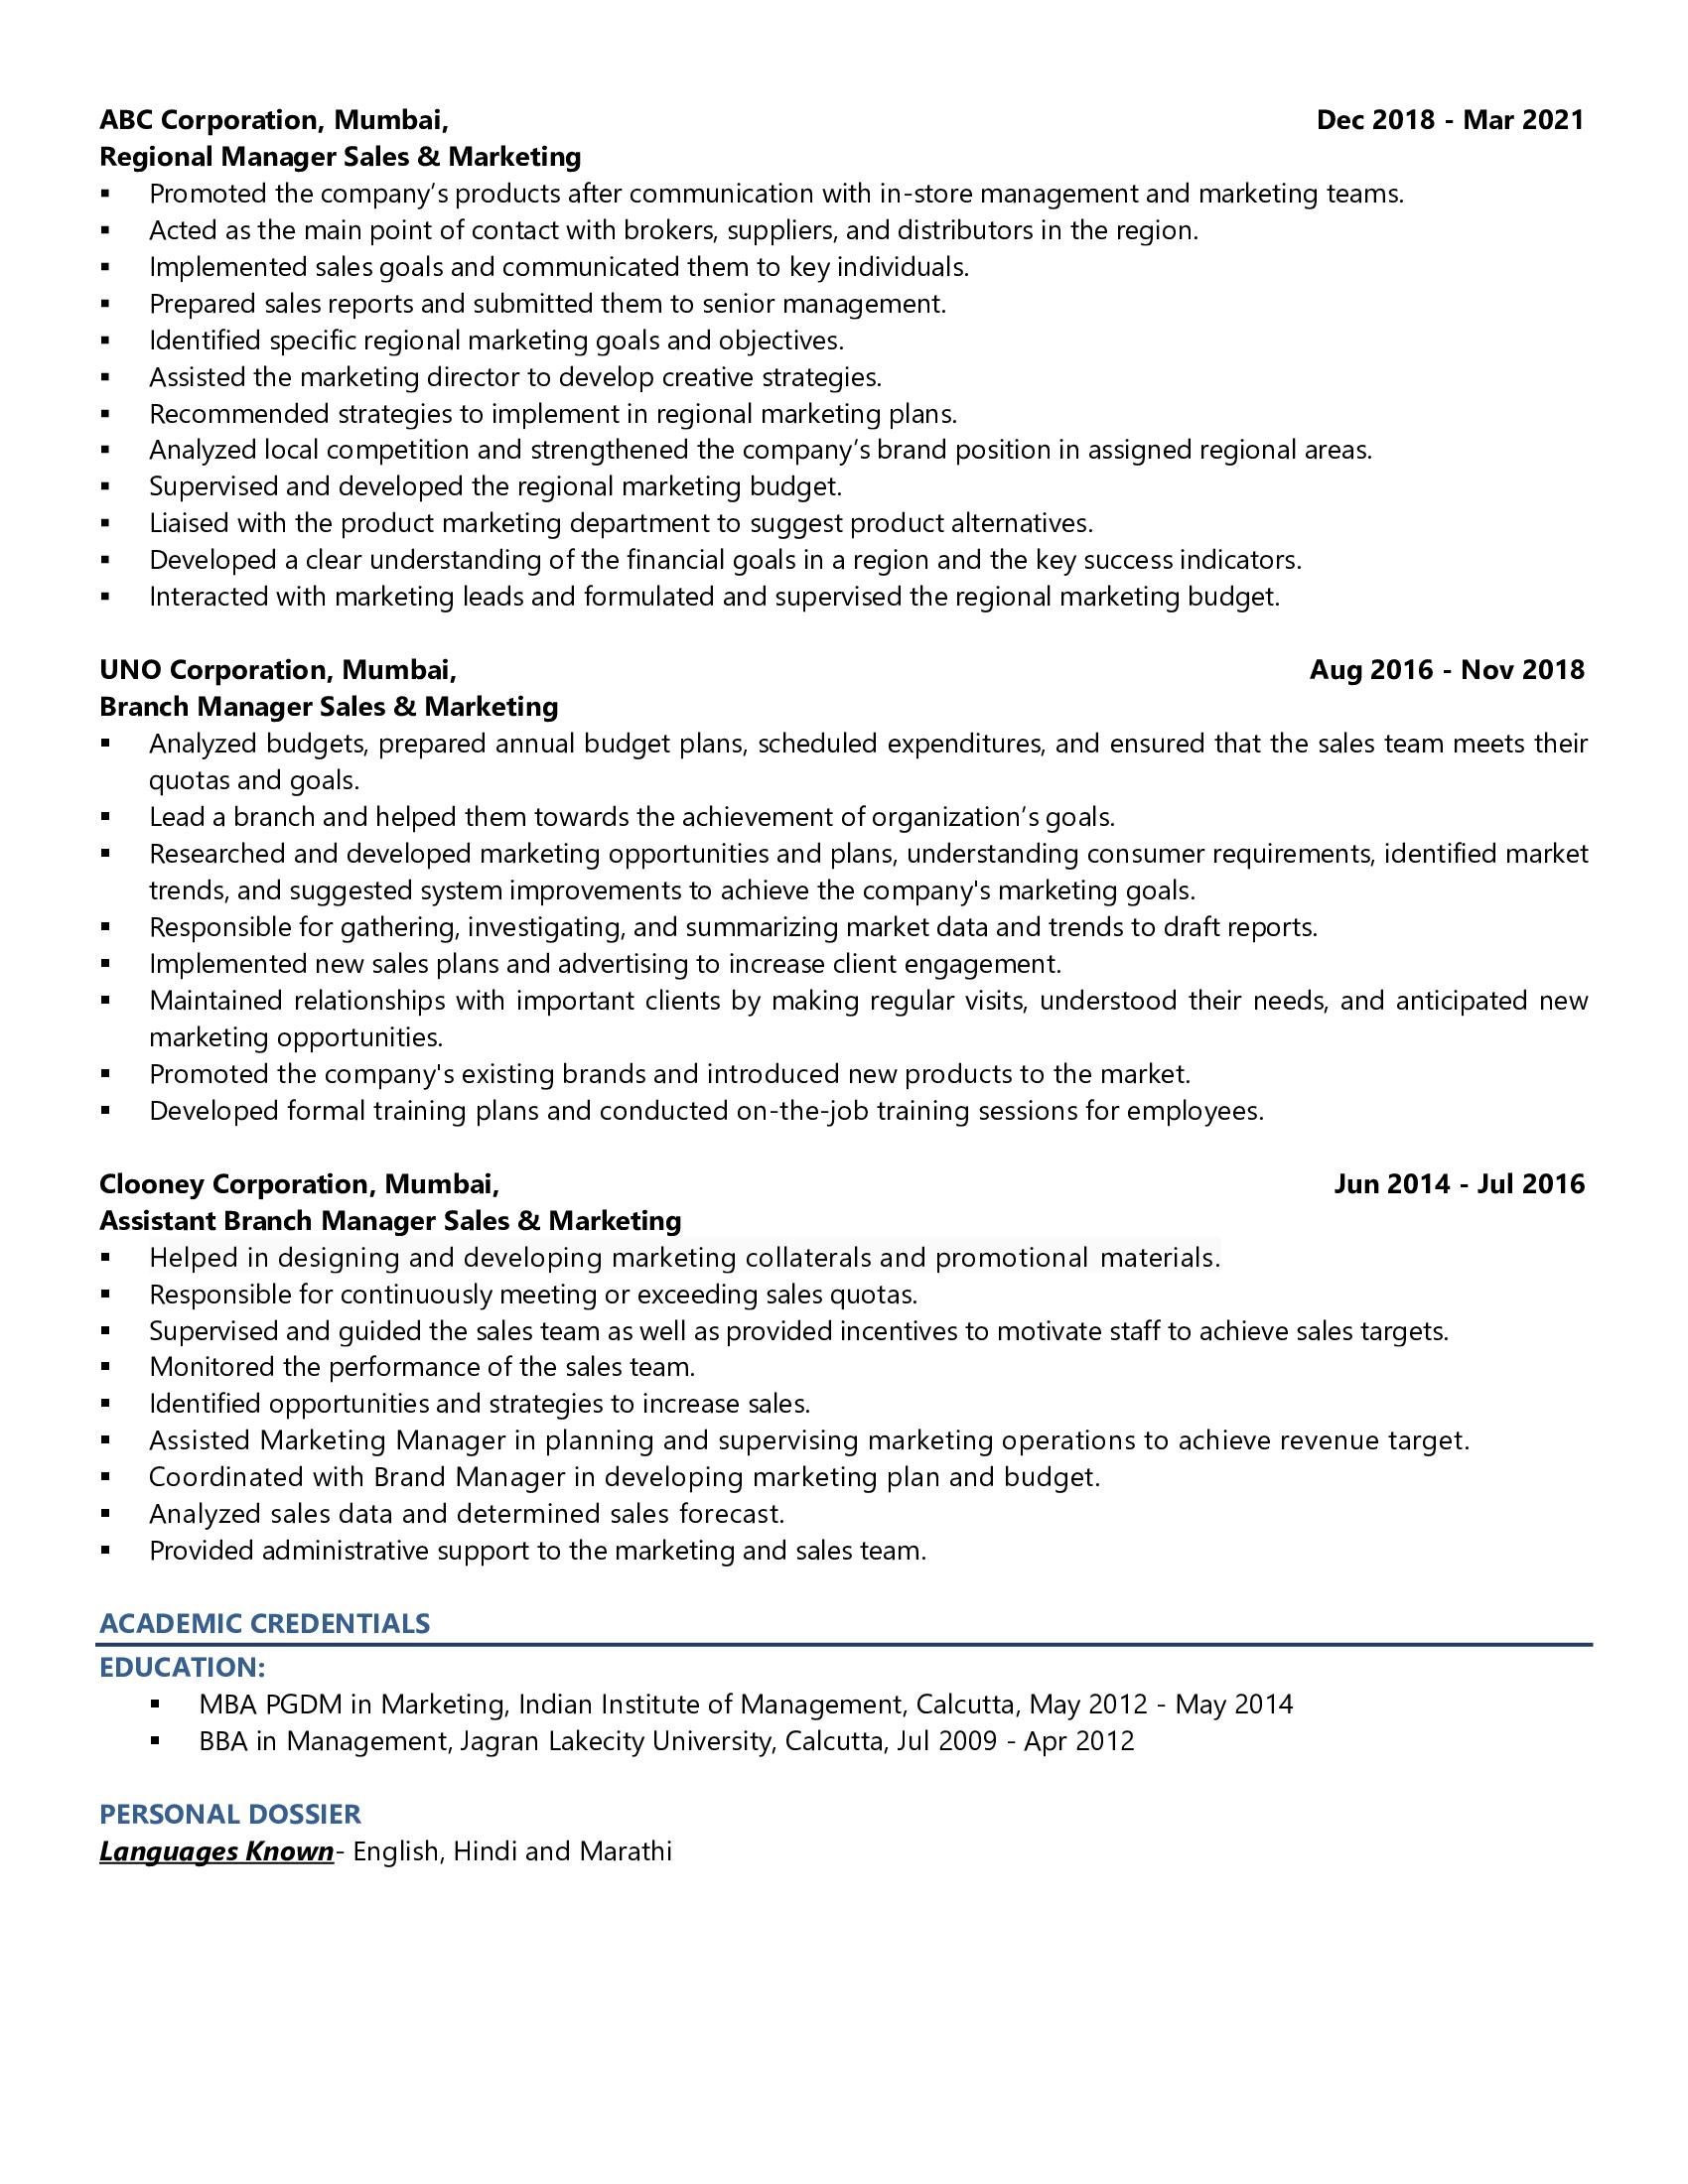 Director of Sales & Marketing - Resume Example & Template